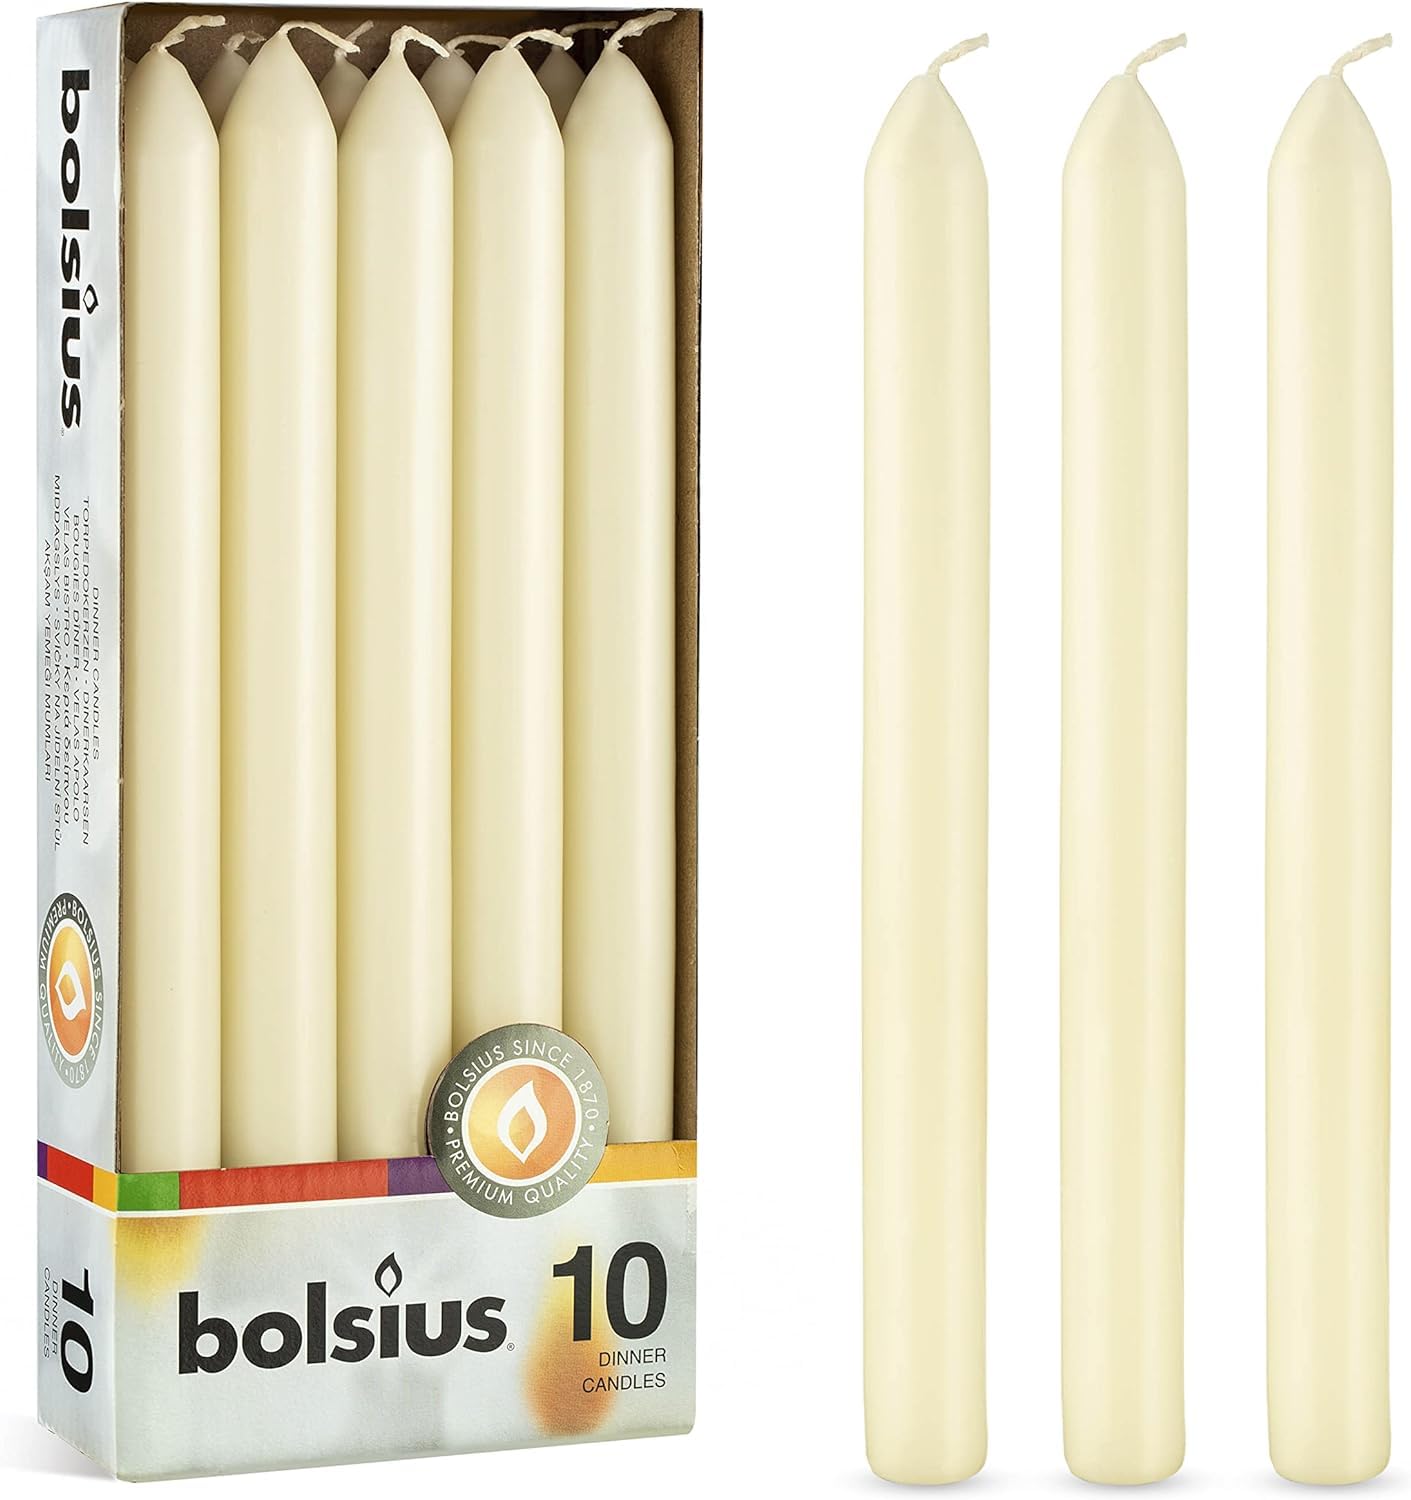 BOLSIUS Ivory Dinner Candles - 10 Pack Unscented 9 Inch Straight Taper Candle Set - 8 Hour Burn Time - Premium European Quality - Smokeless And Dripless Household, Spa, Wedding, And Party Candlestick  - Very Good